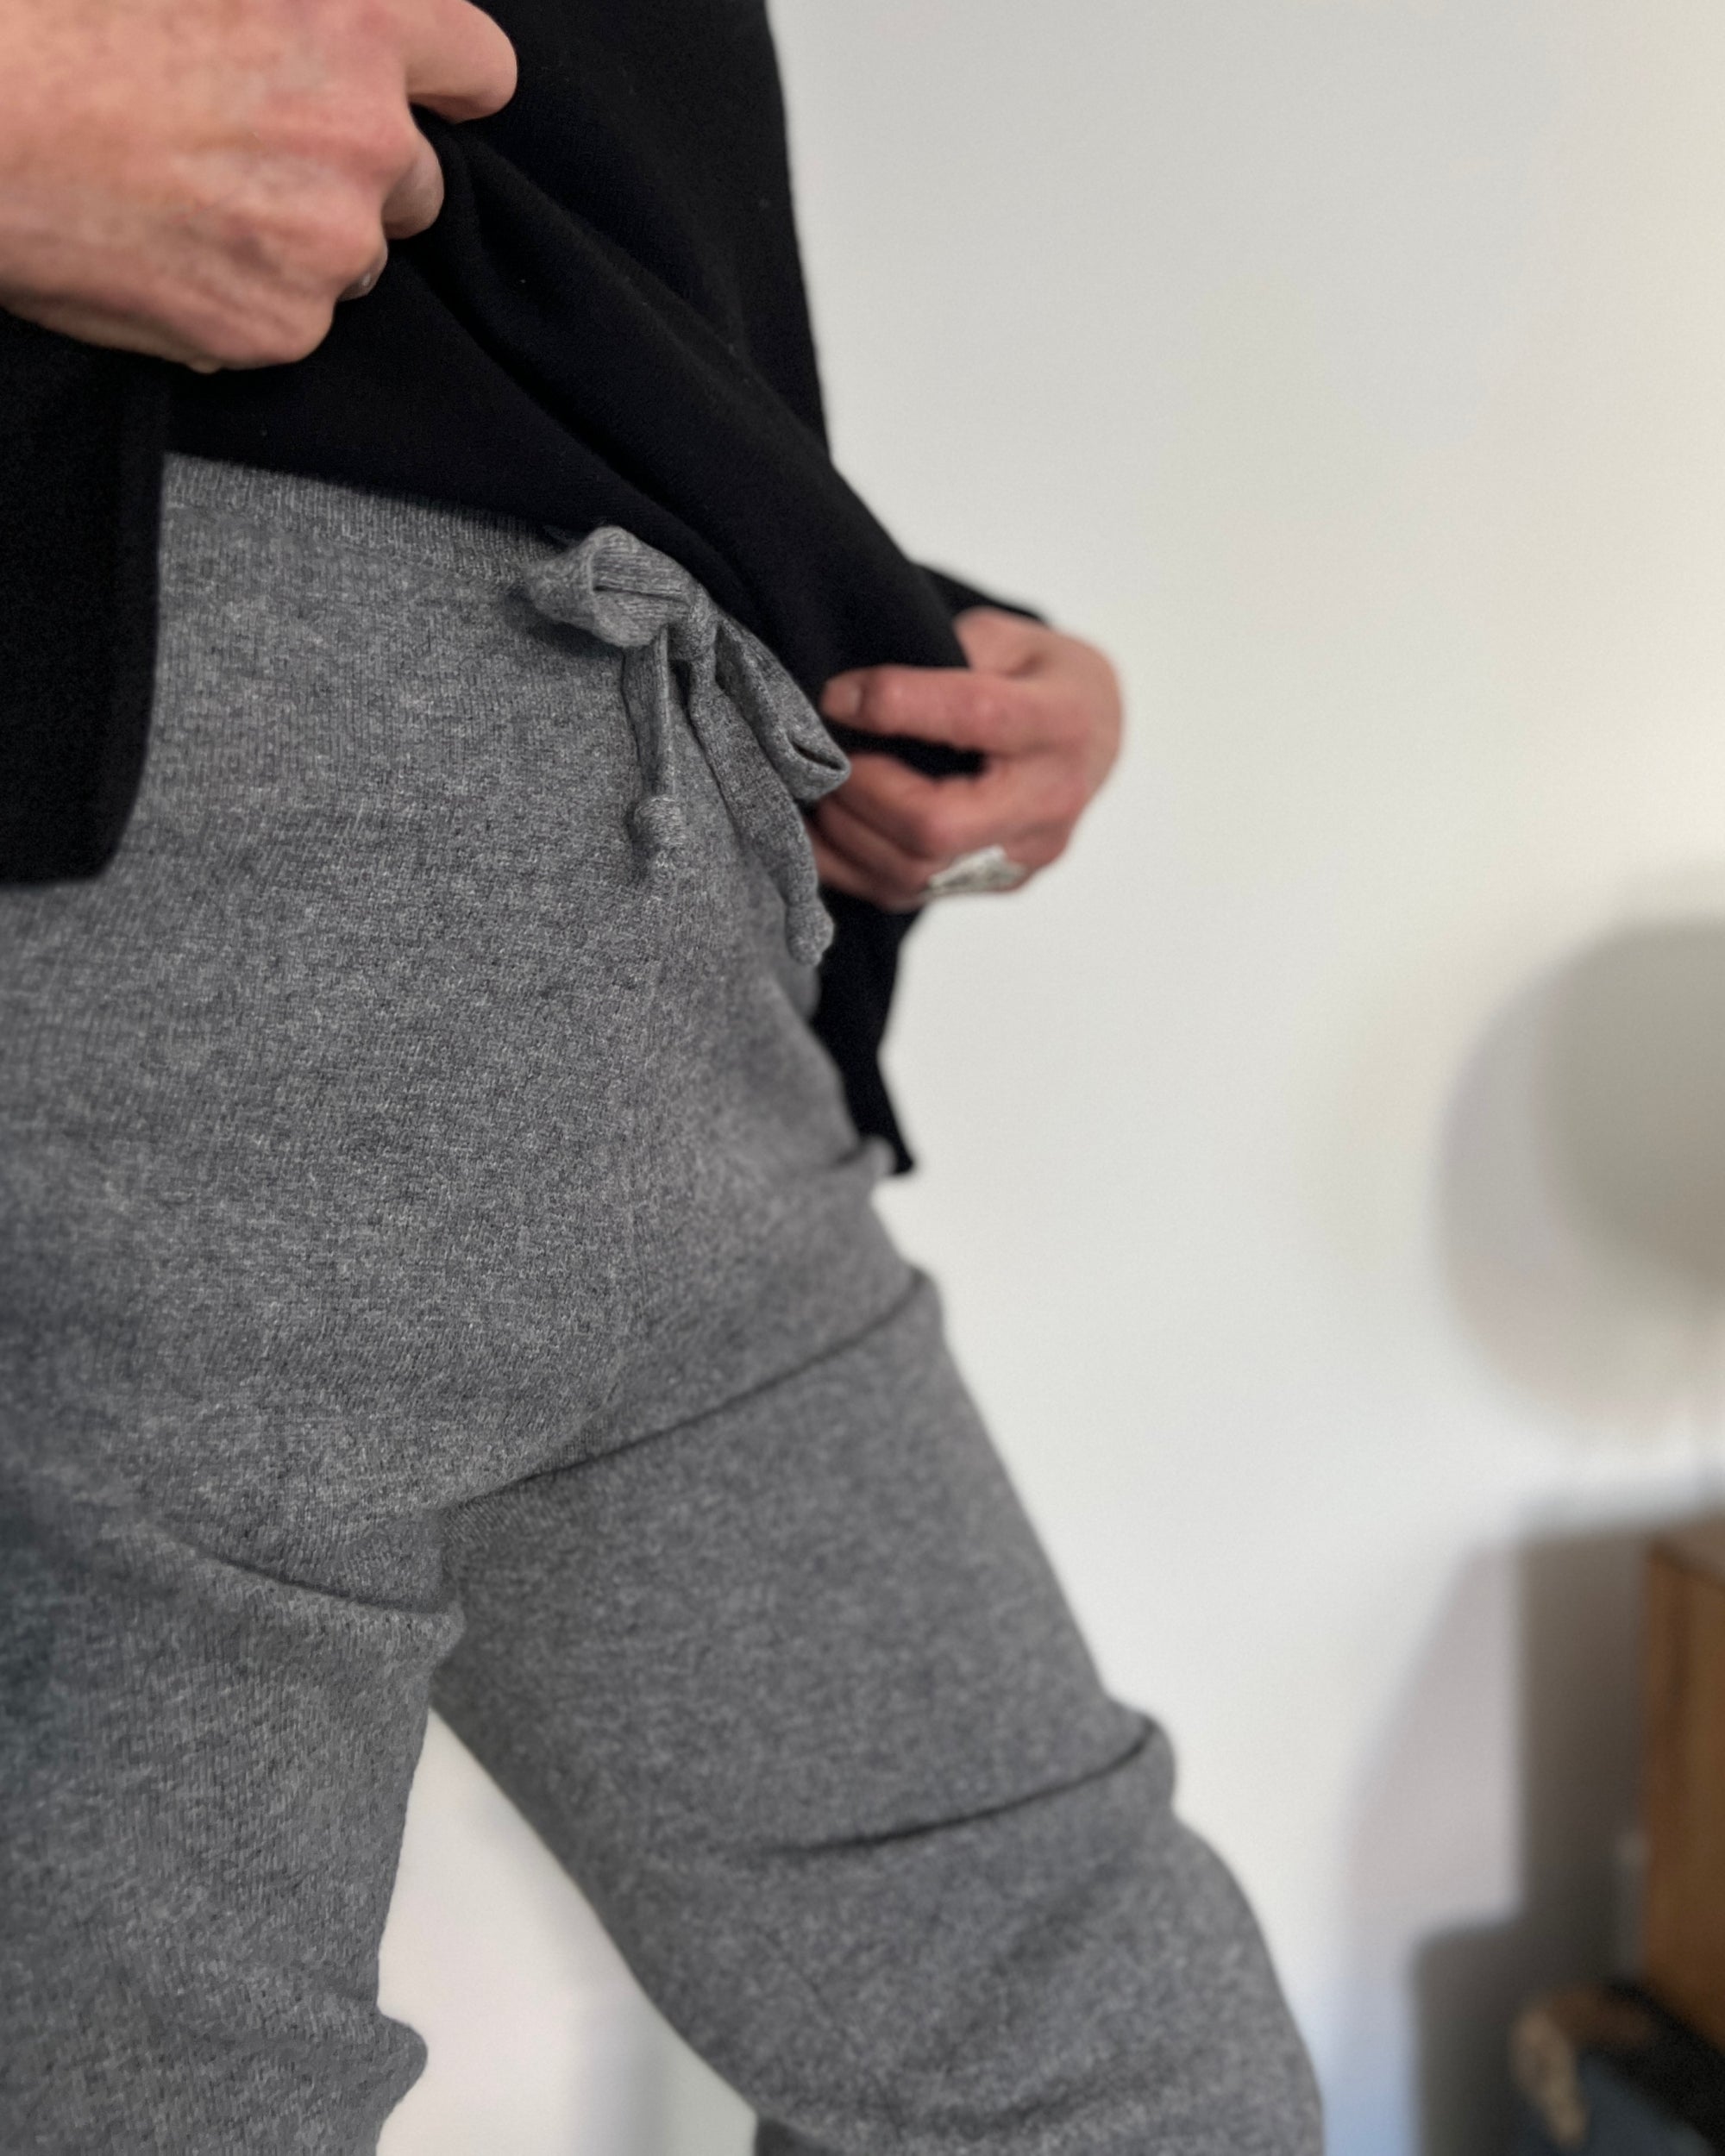 cashmerism : be spoiled track pants in mid grey